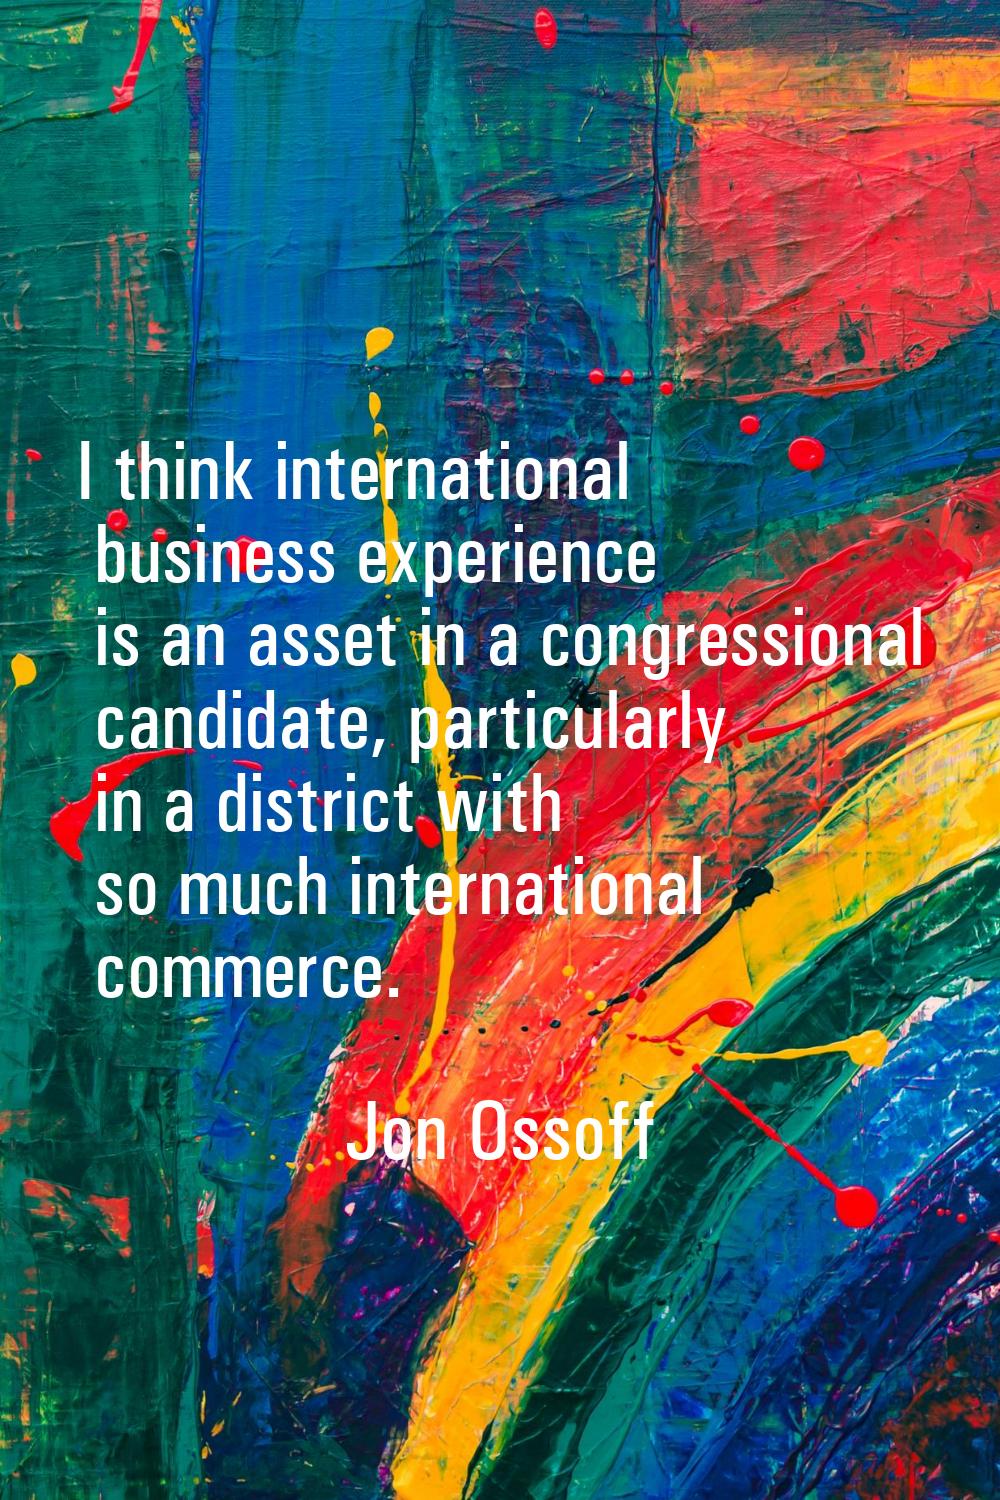 I think international business experience is an asset in a congressional candidate, particularly in